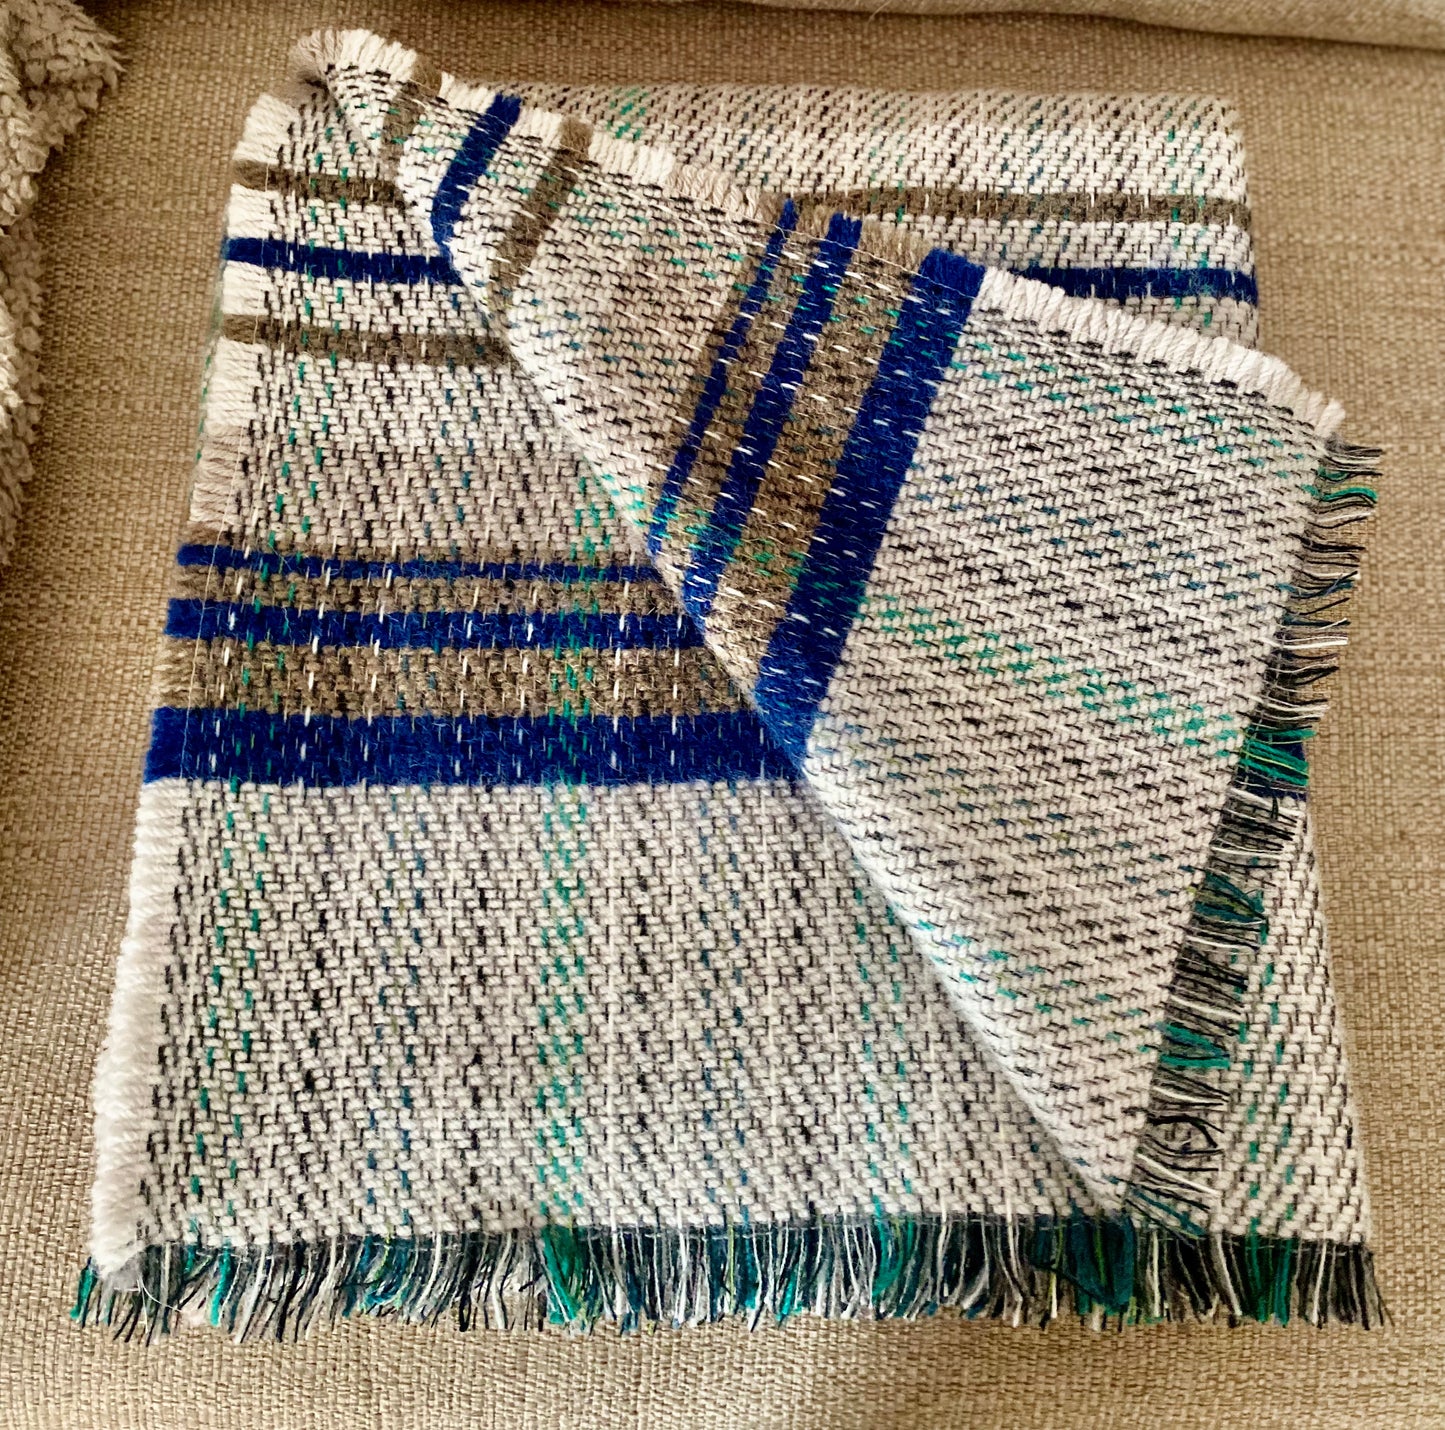 Recycled Wool Blue and Yellow check plaid Throw blanket